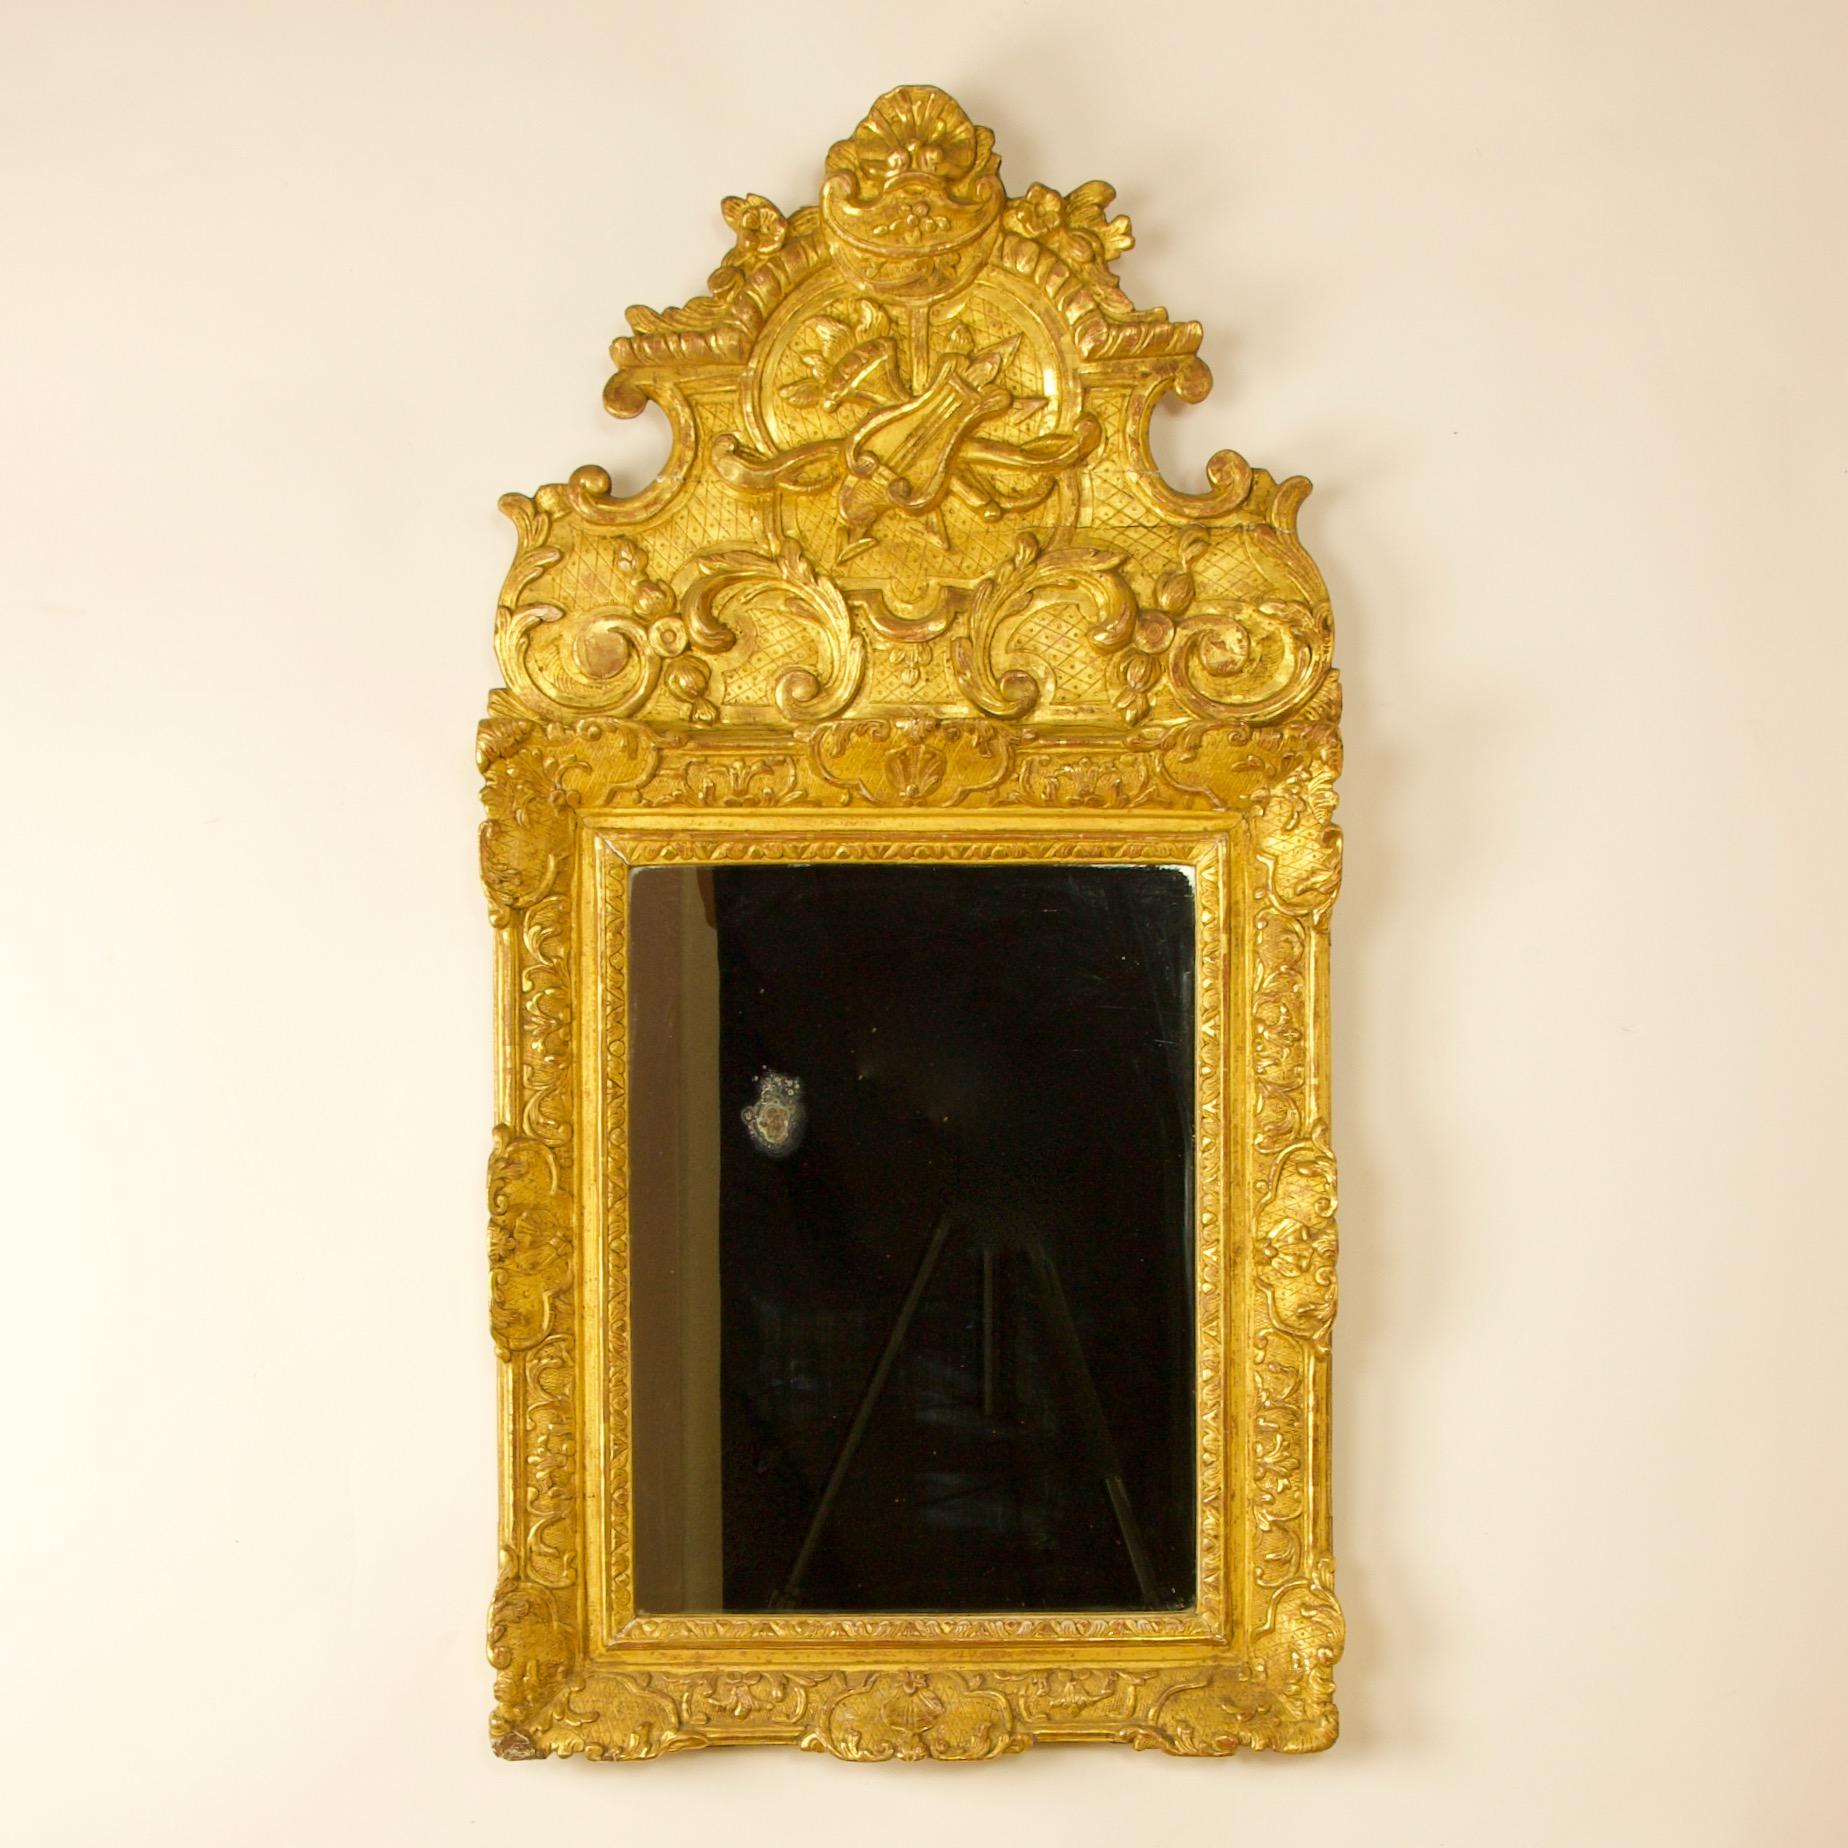 Régence Early 18th Century French Regence Love Symbol Giltwood Mirror For Sale